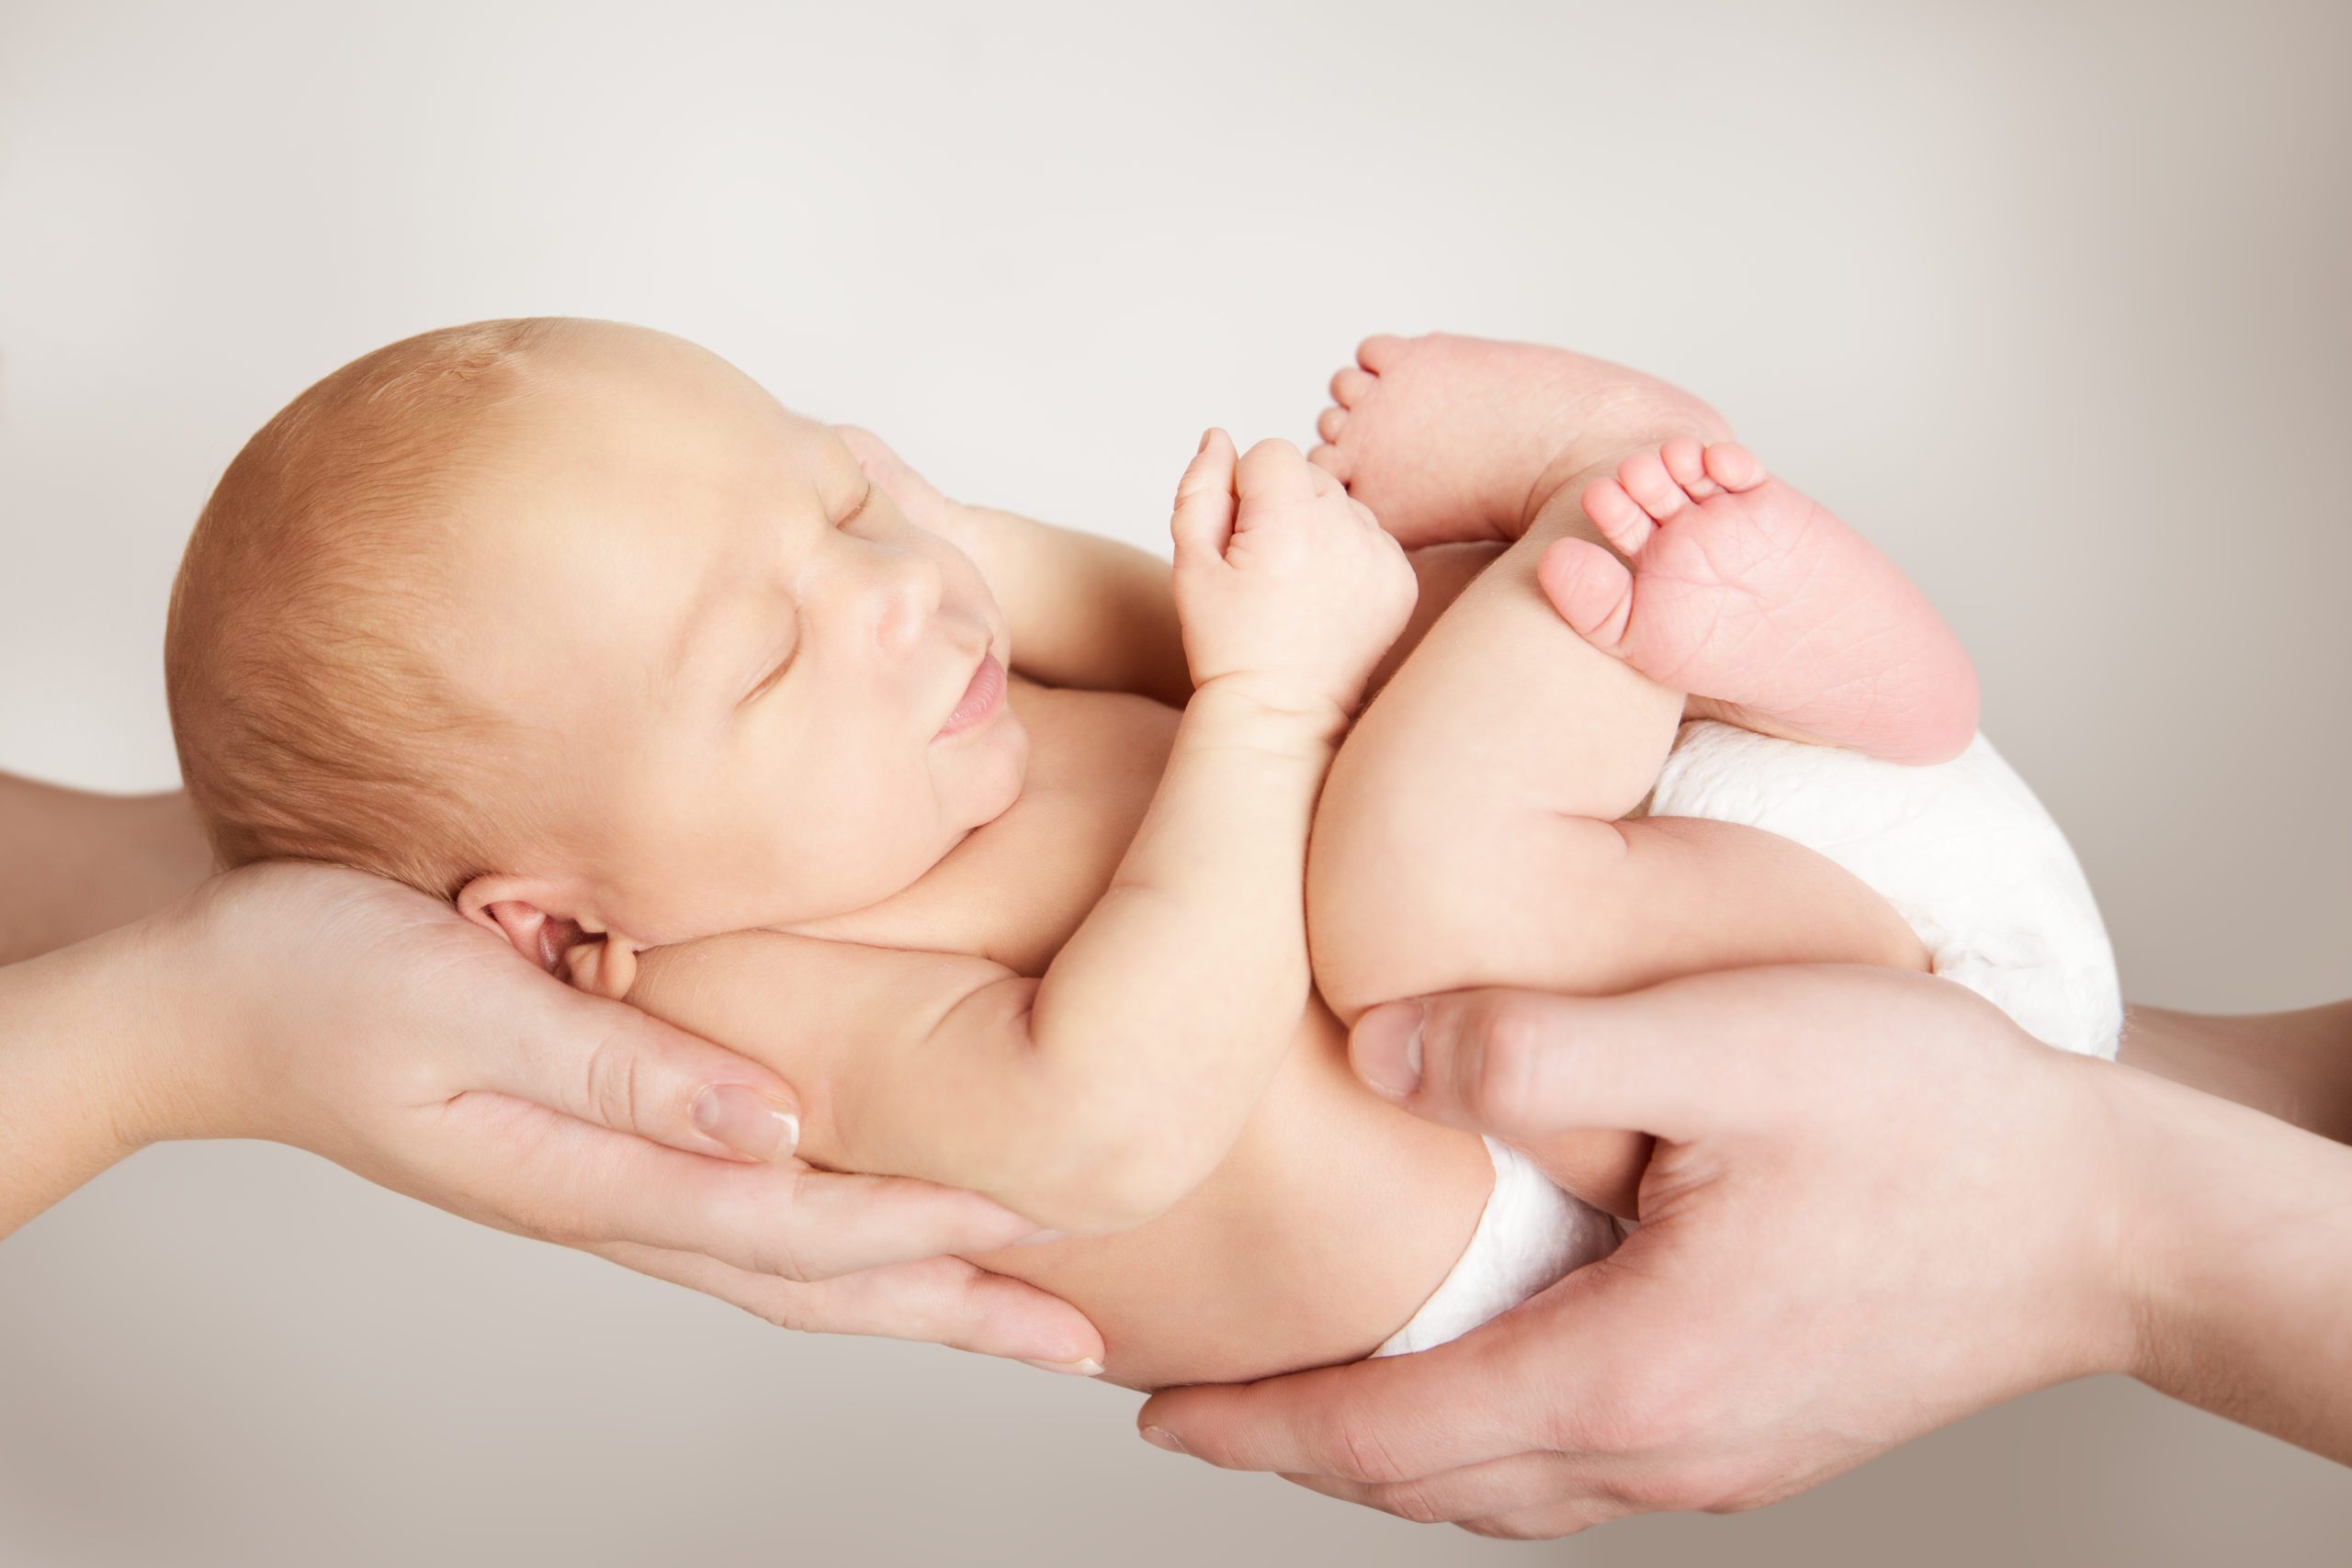 Newborn Baby and Family Concept, Parents Couple Holding New Born Child in Hands, Mother Father Hold Infant Kid